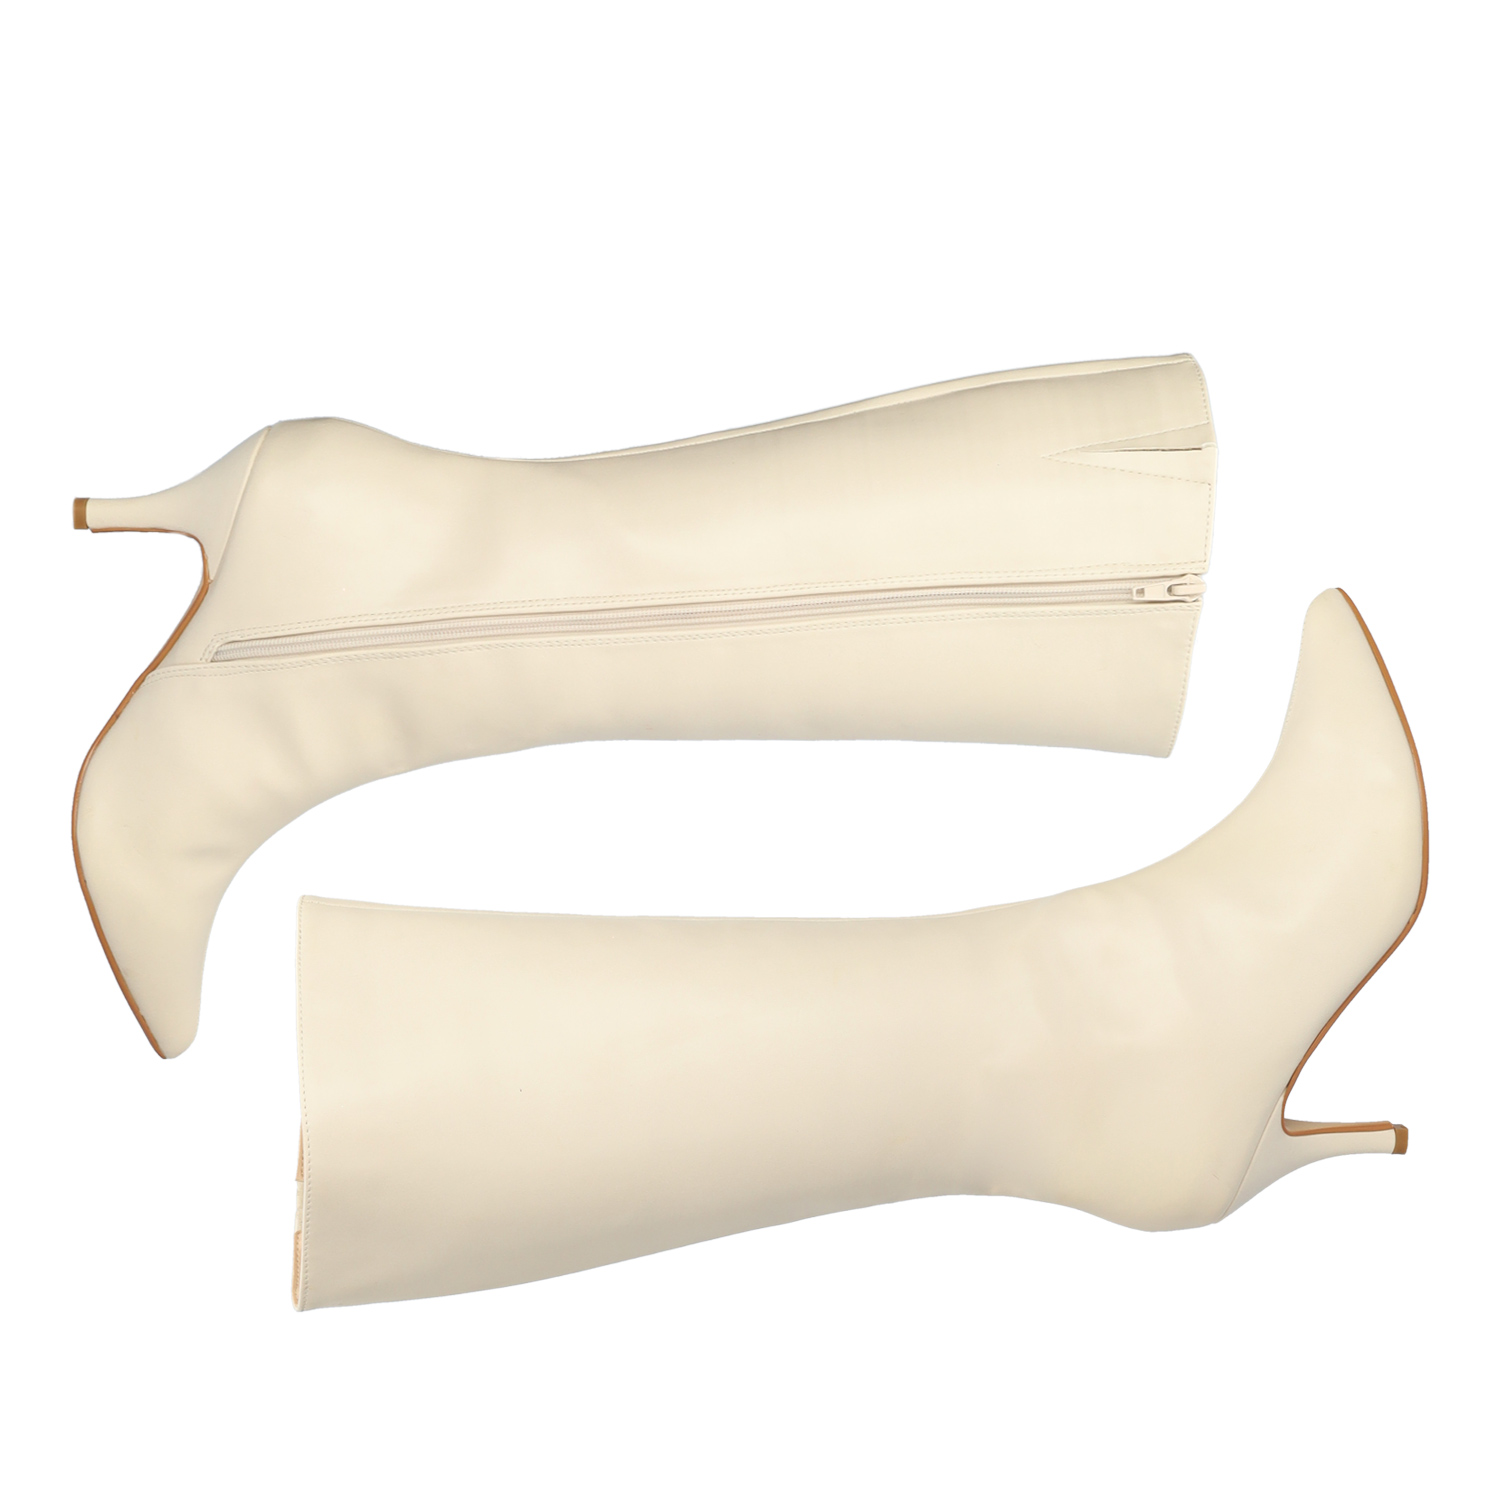 Smooth ivory colored faux leather boots 